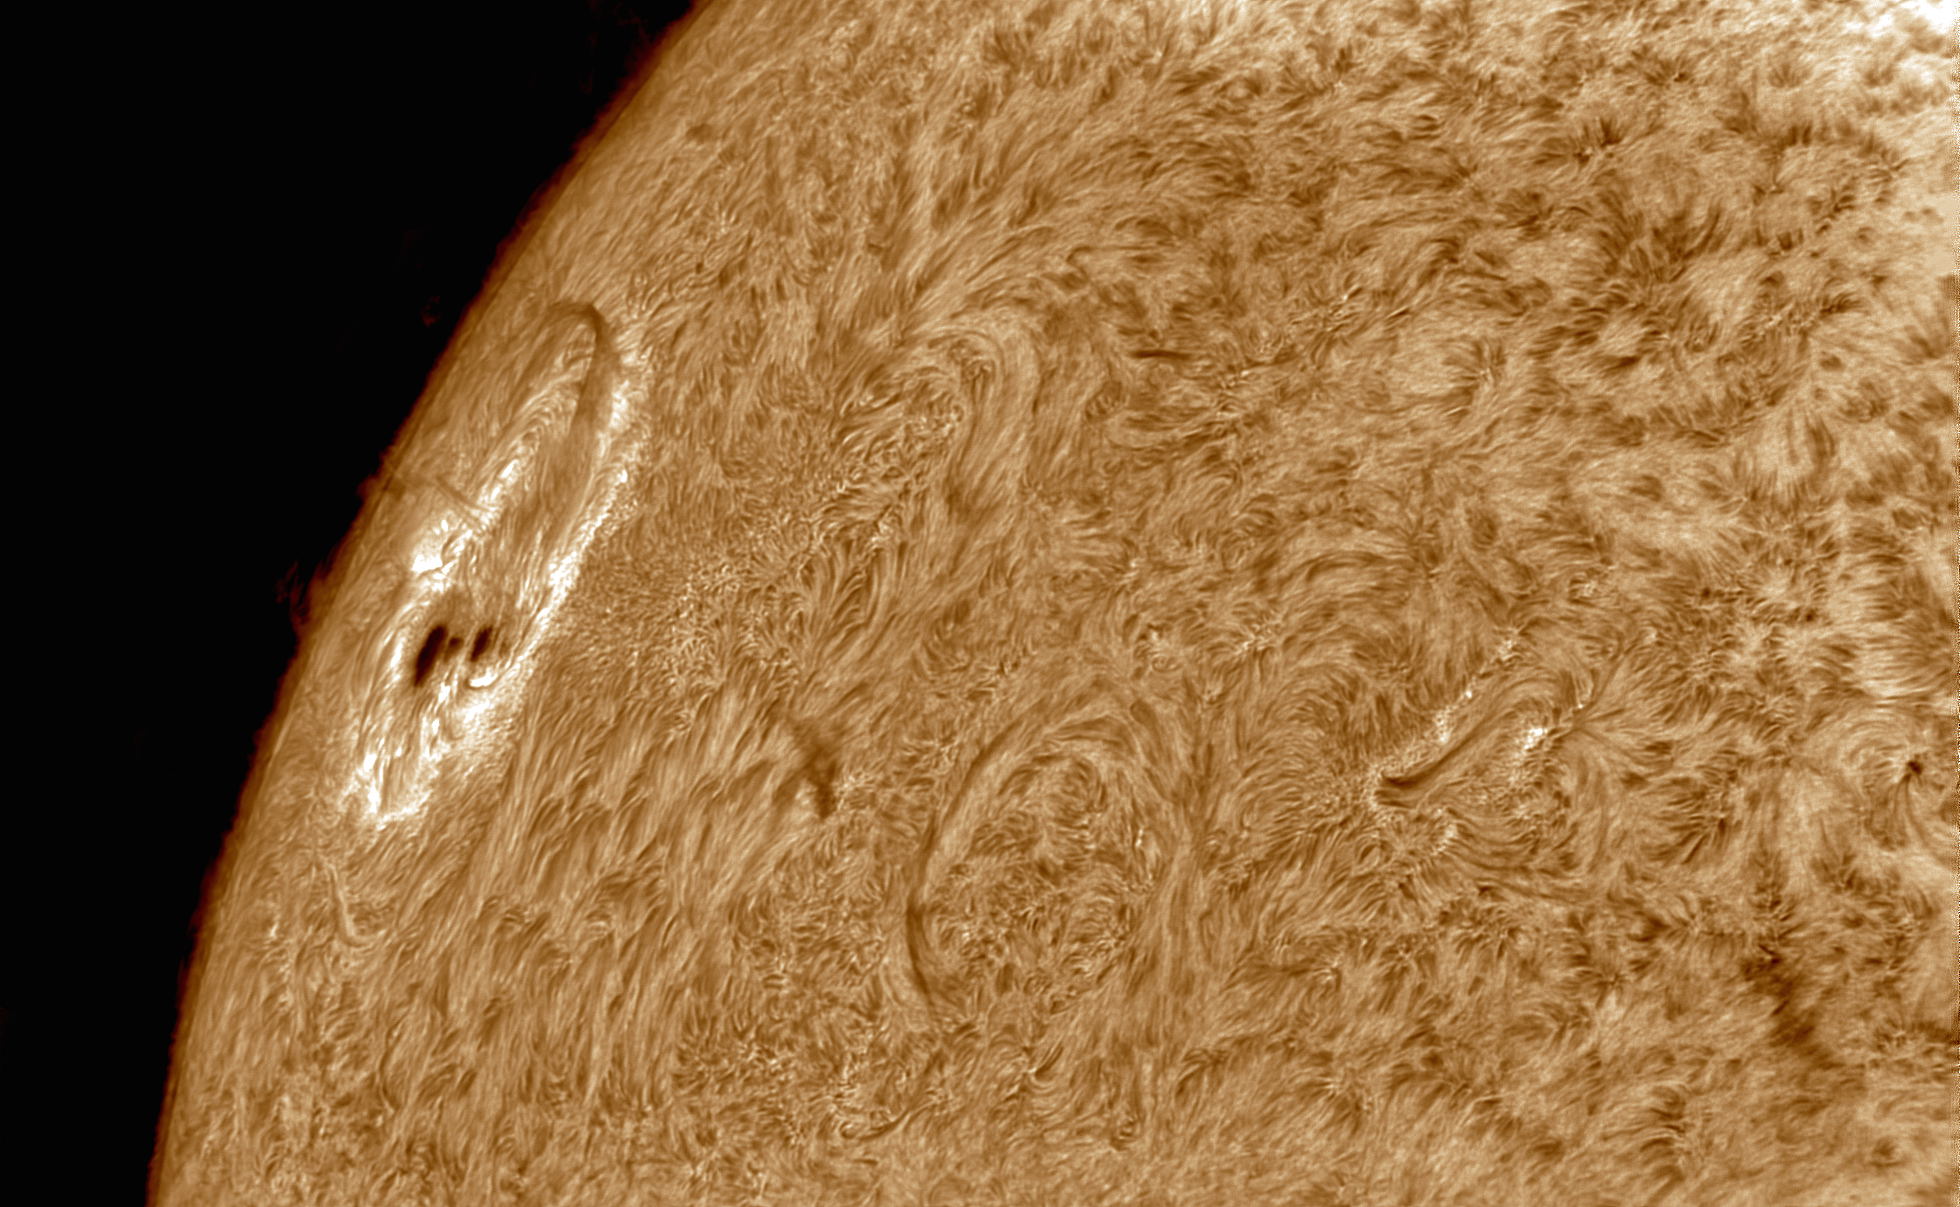 Sunspot with Prominence